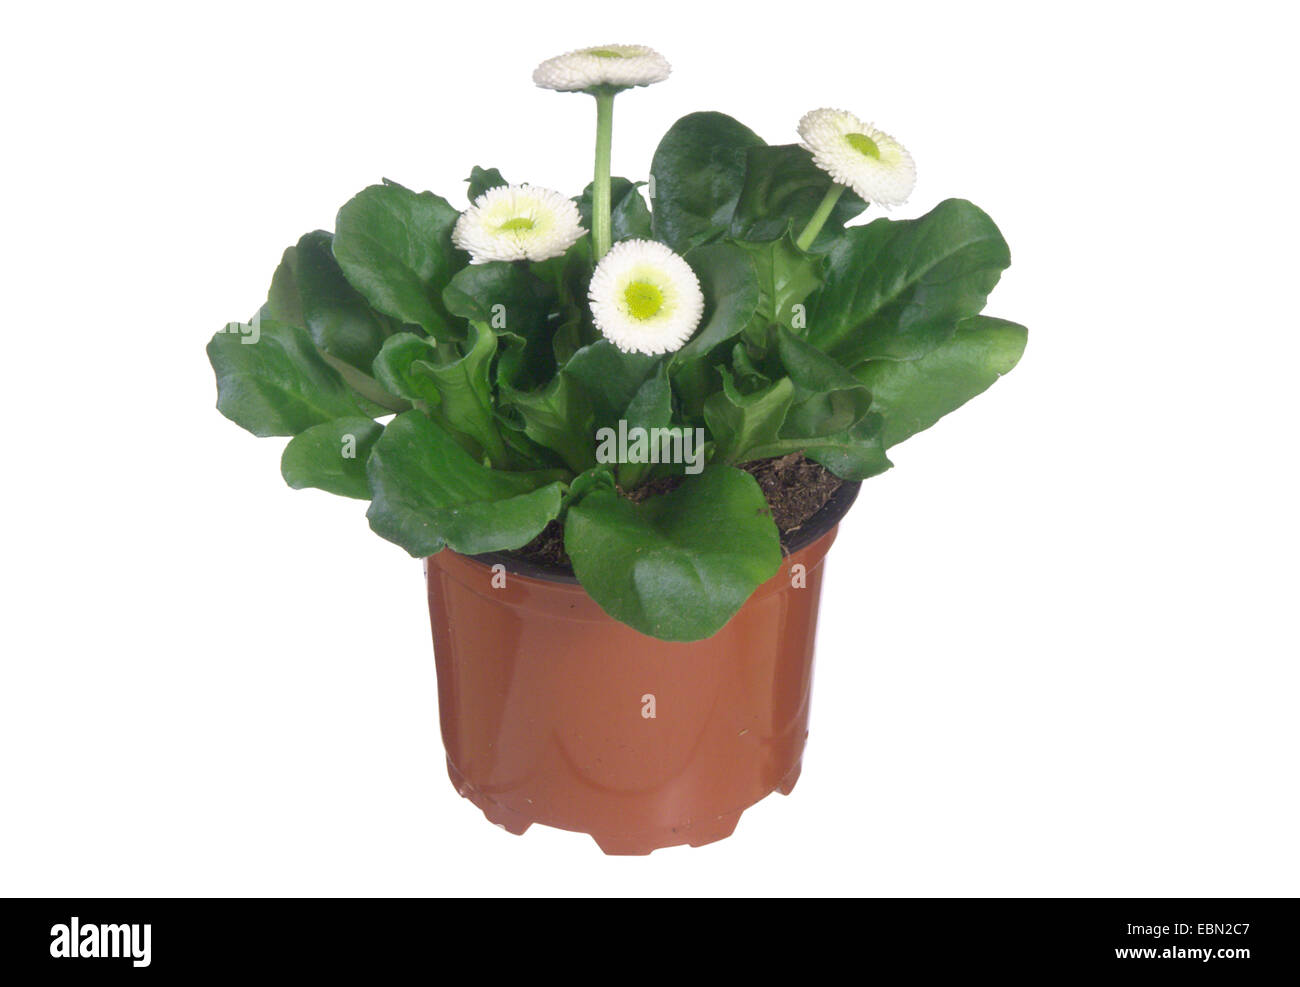 common daisy, lawn daisy, English daisy (Bellis perennis), cultivar with white flowering inflorescences, potted plant Stock Photo